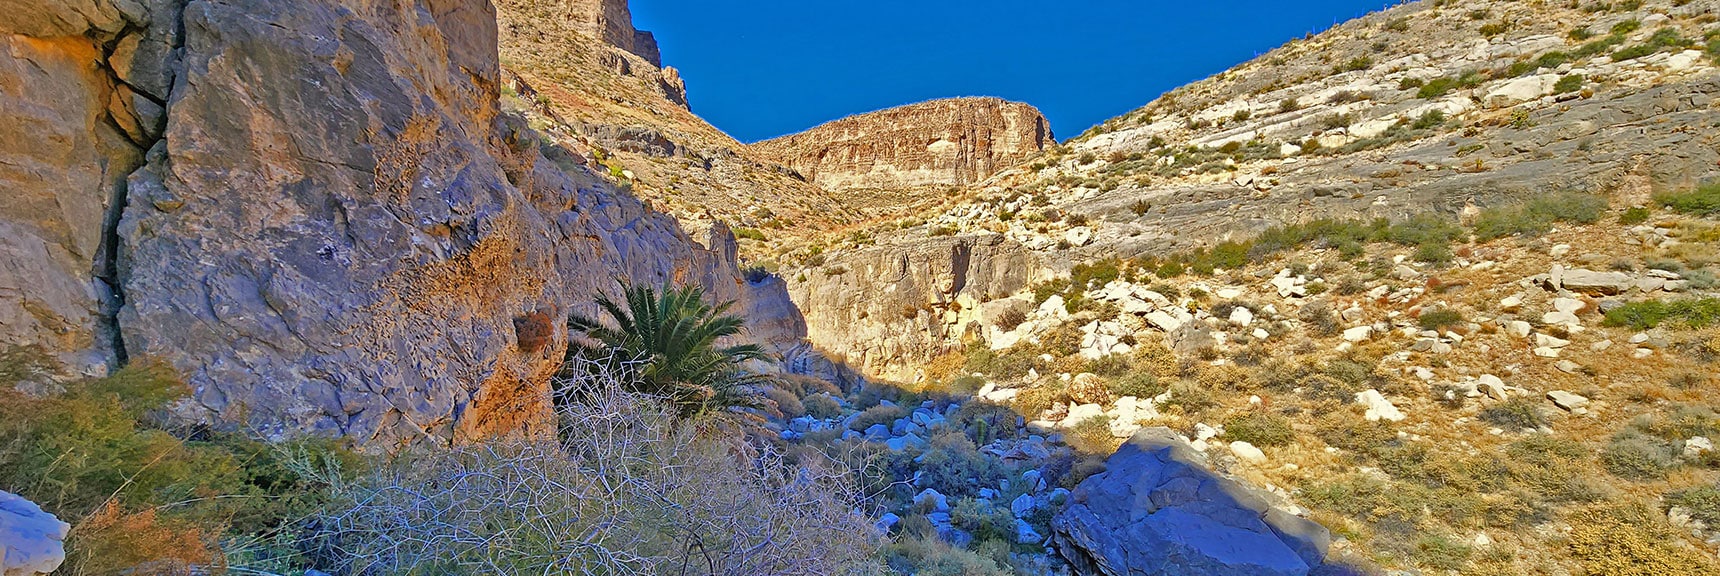 Arrival at Mule Spring. Surrounded by Cliff Walls Making it a Box Canyon. | Landmark Bluff | Lovell Canyon, Nevada